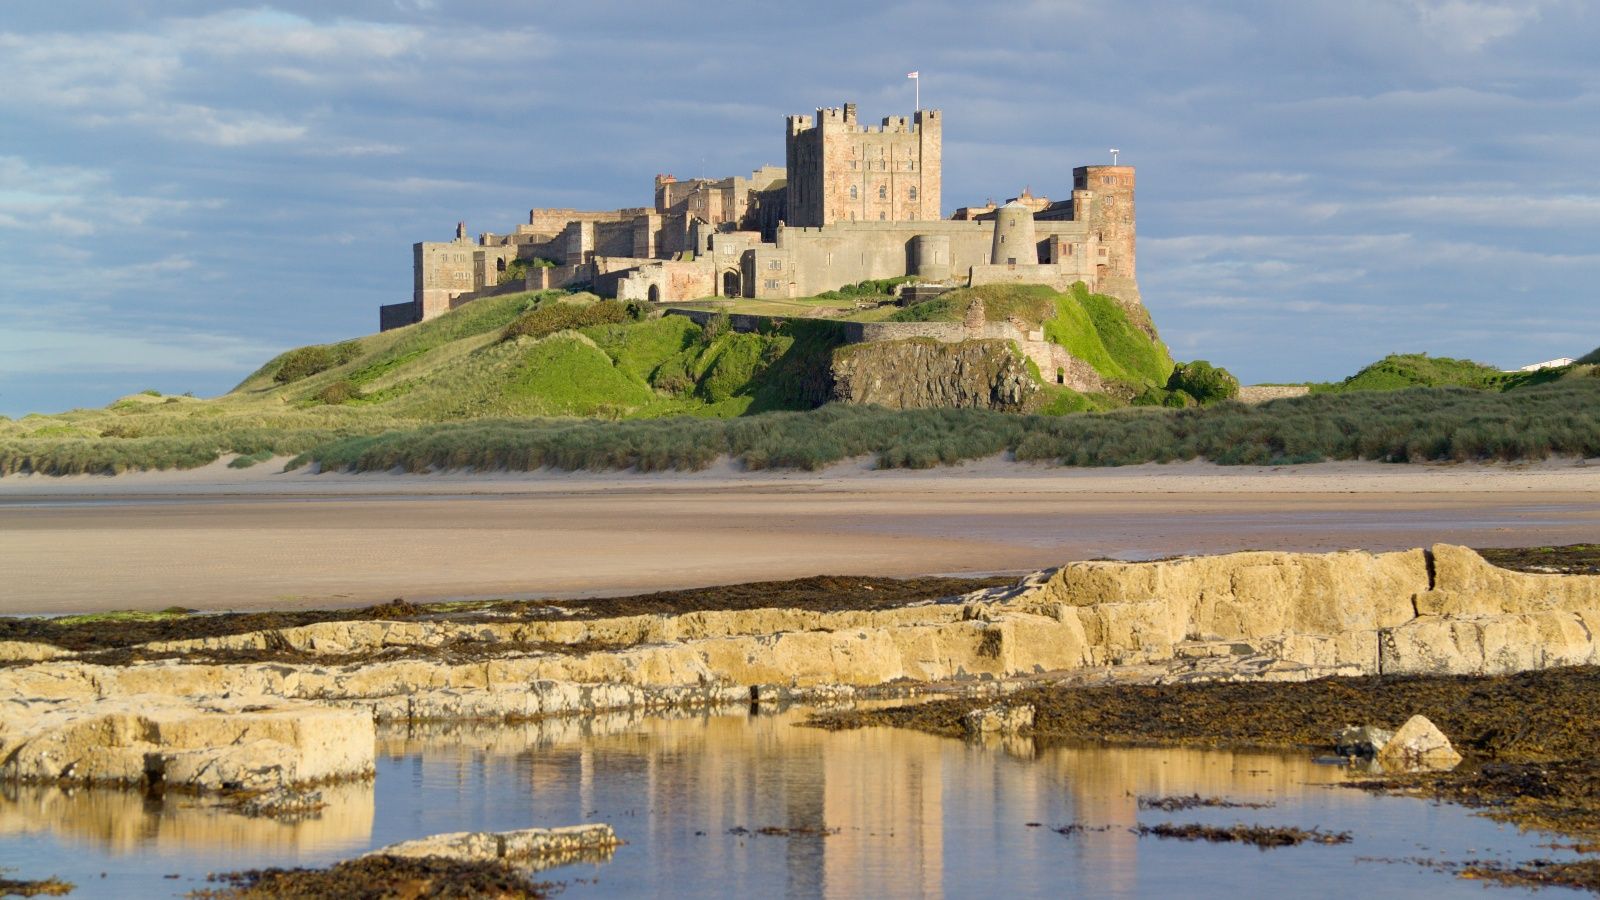 <p>                     <strong>Location: </strong>Northumbria, NE69 7DF | <strong>Website: </strong>bamburghcastle.com                   </p>                                      <p>                     Once the royal seat of the Kingdom of Northumbria, Bamburgh was a fearsome stronghold throughout the Middle Ages. The Norman-built fortress spans nine acres, and rests upon a rocky volcanic crag, with views stretching down the windswept Northumberland coast and across the North Sea to the Farne Islands.                   </p>                                      <p>                     Its fortified walls—11ft thick at points—were a formidable line of defense against marauding armies. Today, you can enjoy a more serene stay in the castle’s elegant, turreted guard towers, 150ft above the white sands of Bamburgh Beach.                   </p>